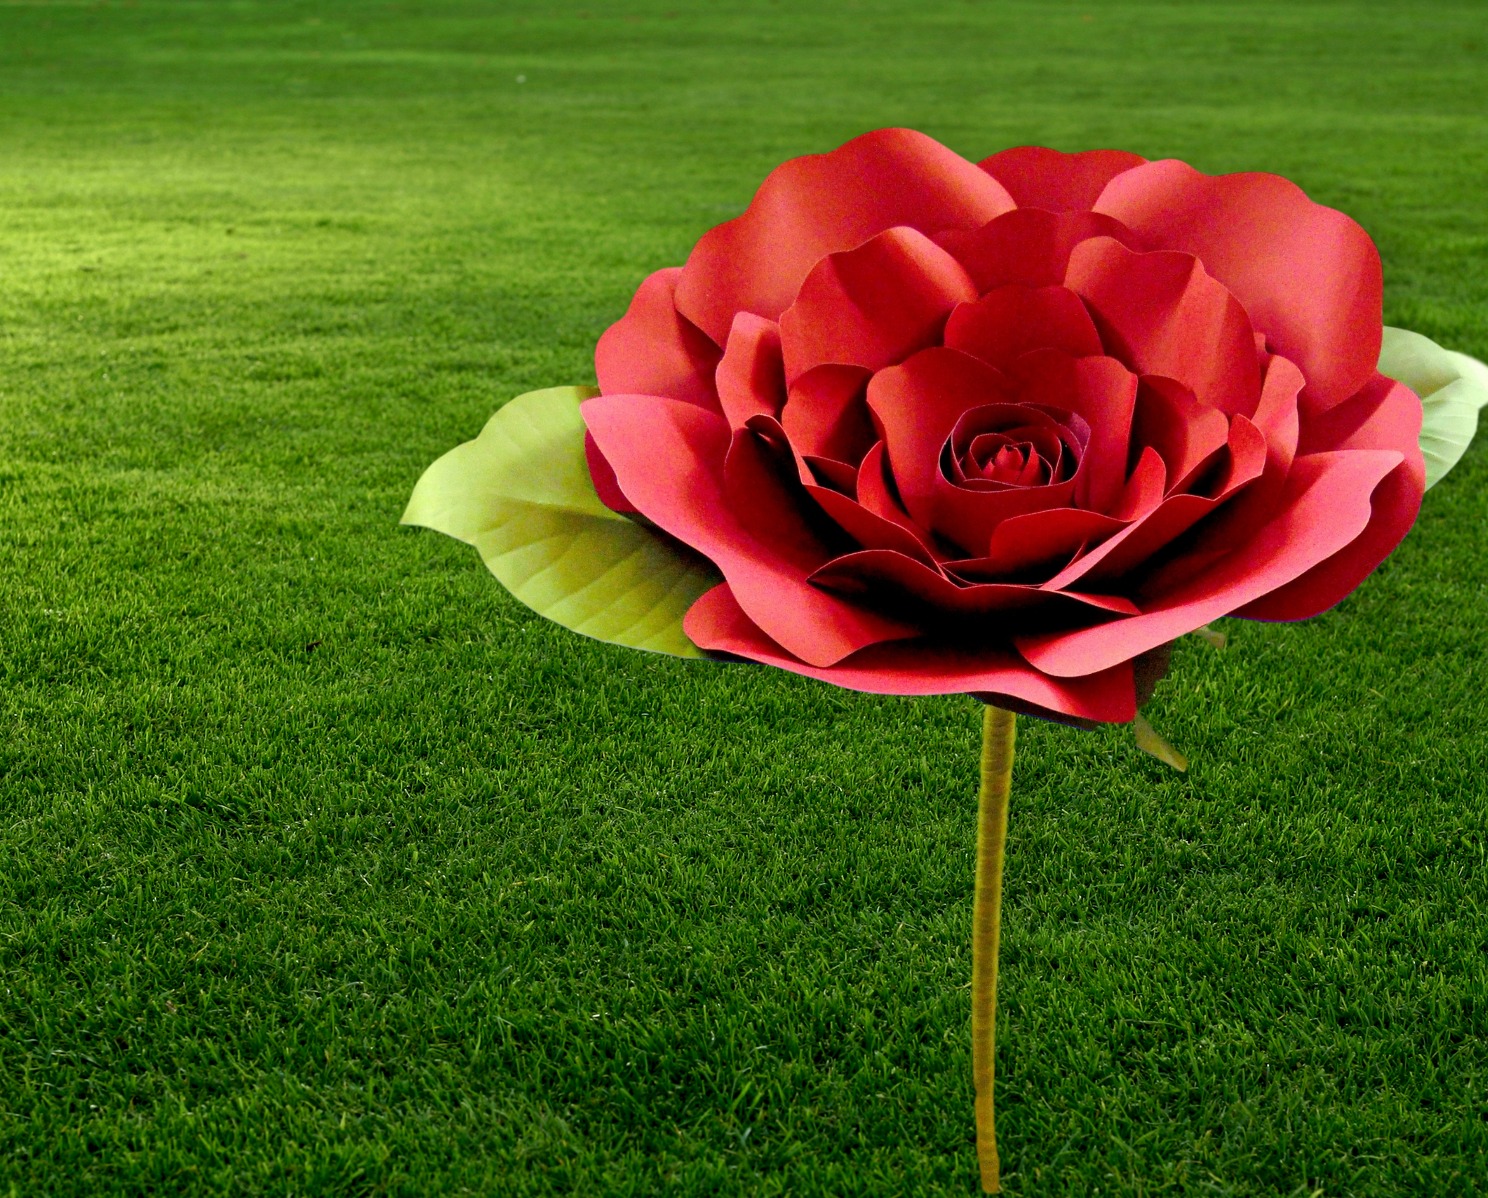 A giant paper red rose stands in a green manicured lawn. In this giant paper flower stem tutorial, you can make your own large flower stems from wood dowels.